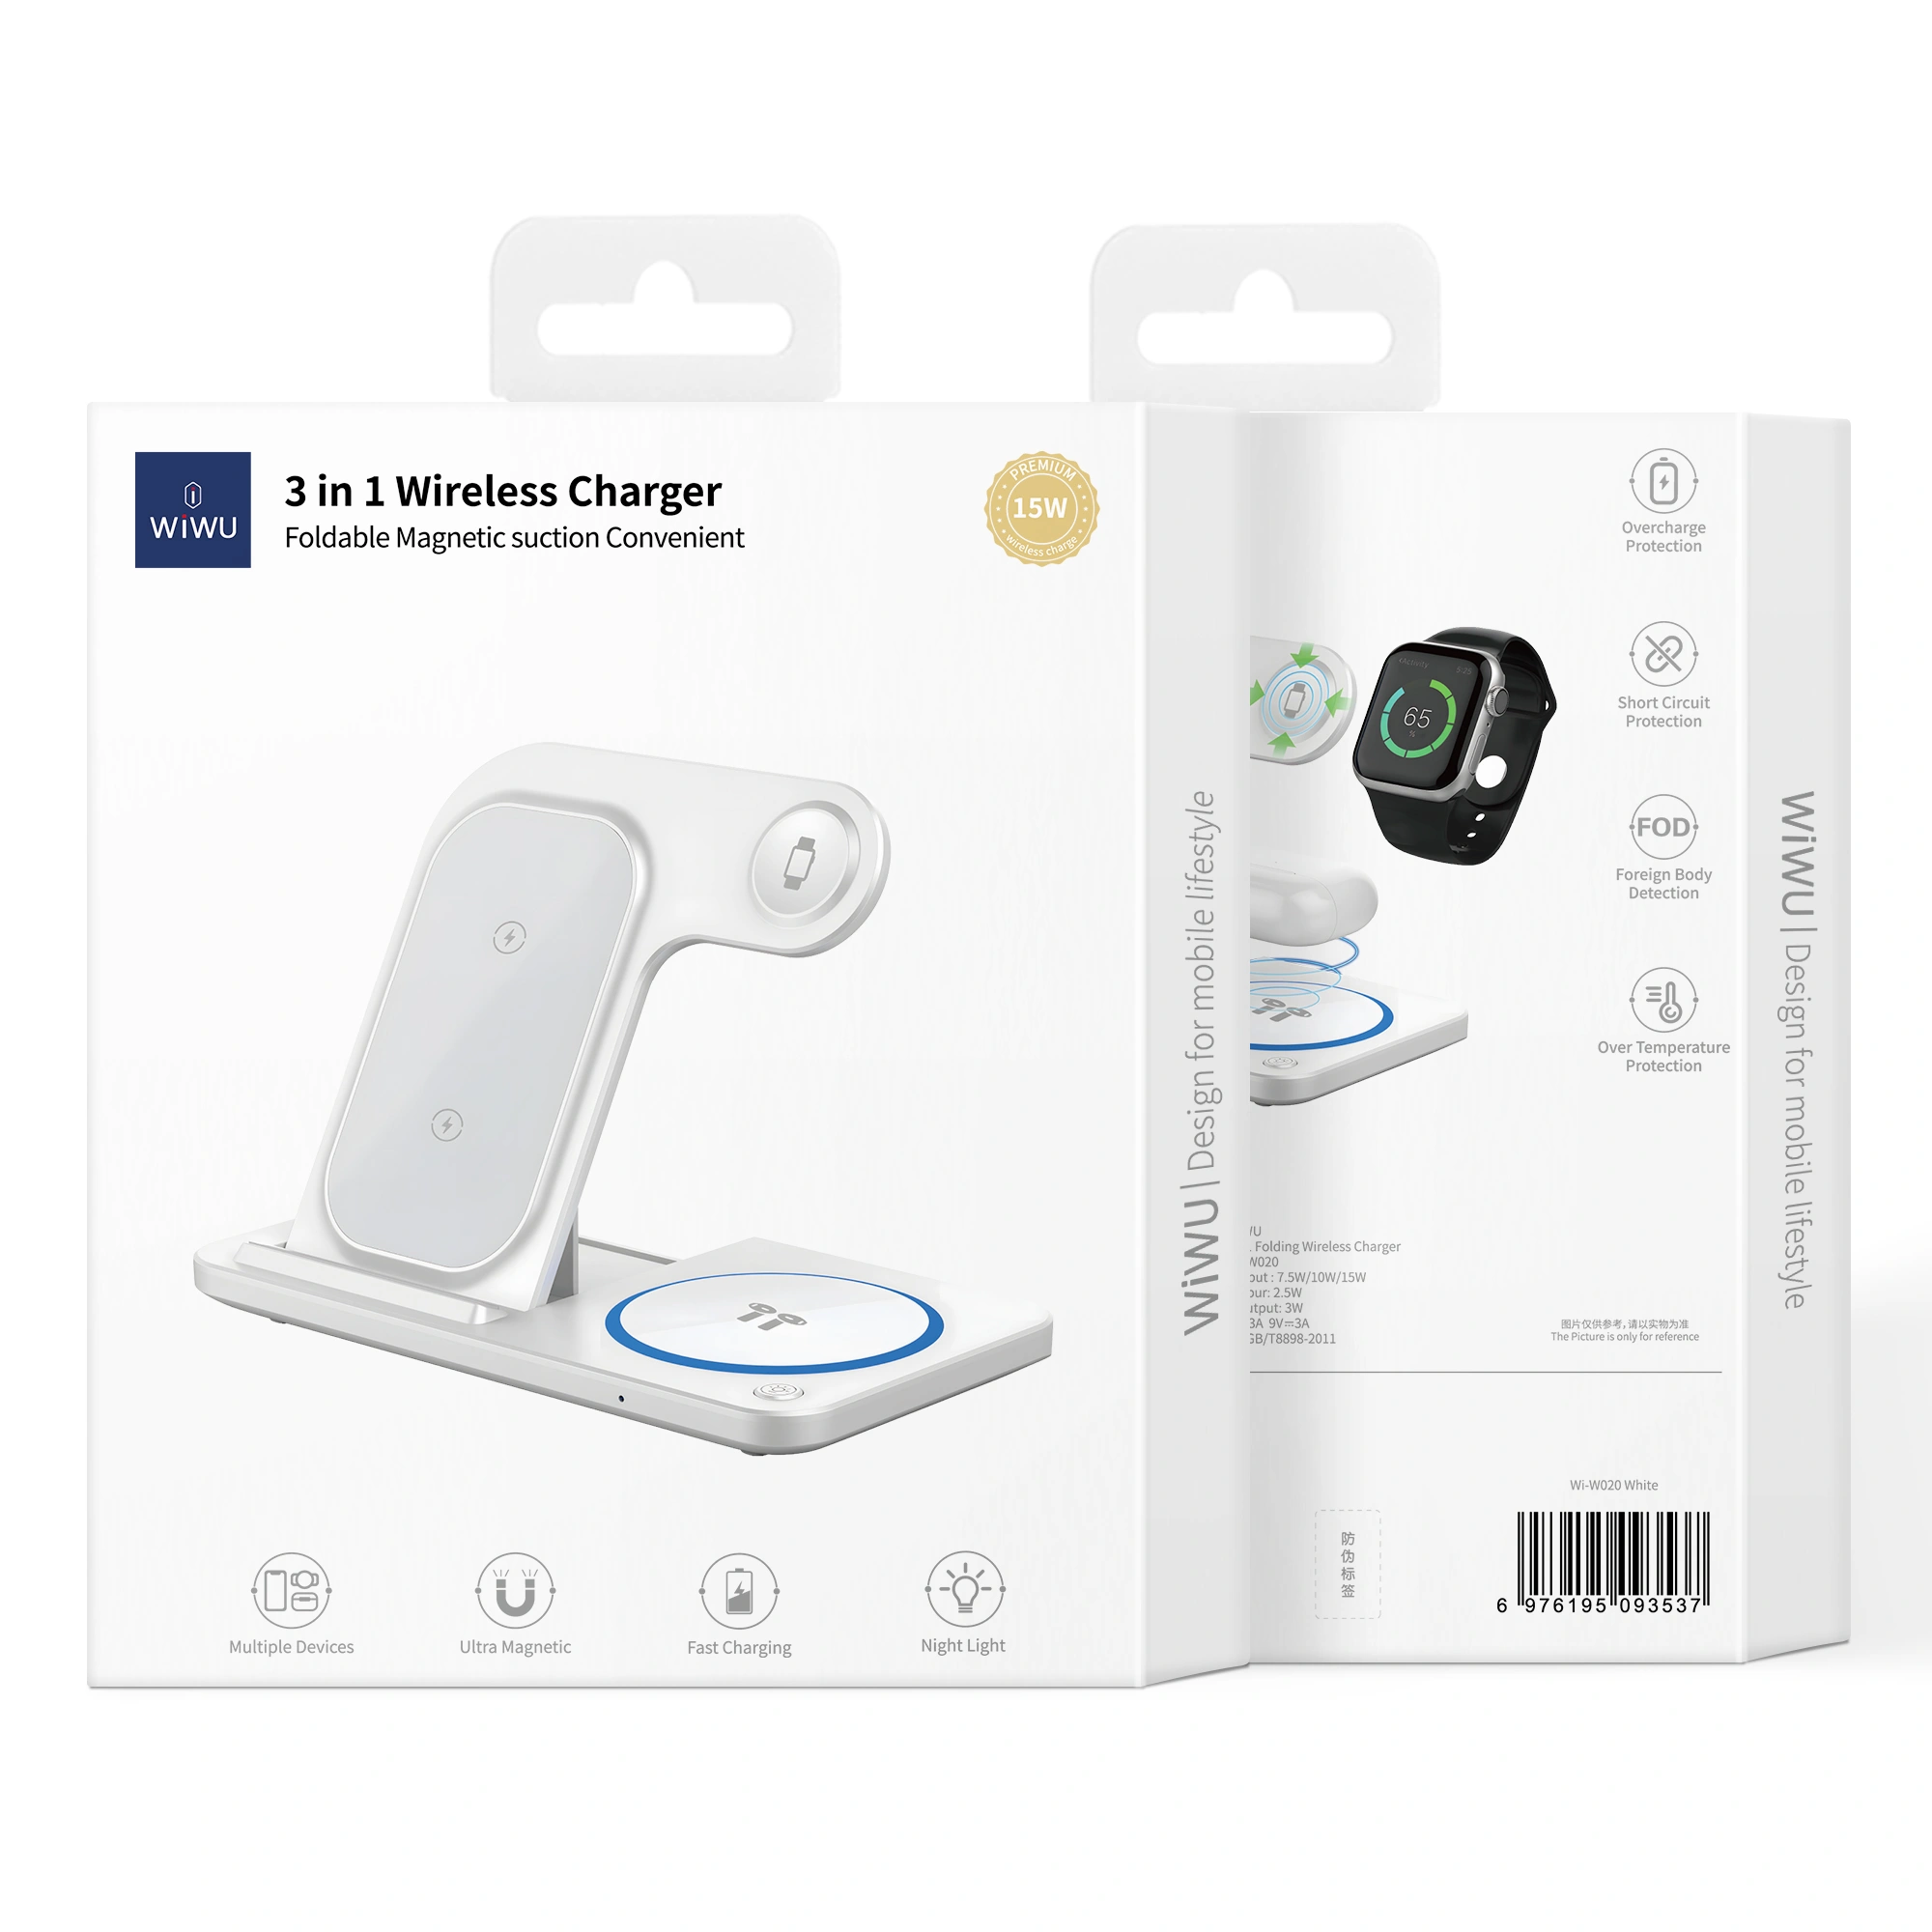 Auto Orient Wiwu Material: Abs+Pc Type C Charging Port Support 15W Max Wireless Charging 3 In 1 Wireless Charge For Phone, Airpods, Iwatch Net Weight 320G Wiwu Wi-W020 Foldable 15W 3 In 1 Wireless Charger Wiwu Wi-W020 Foldable 15W 3 In 1 Wireless Charger - White